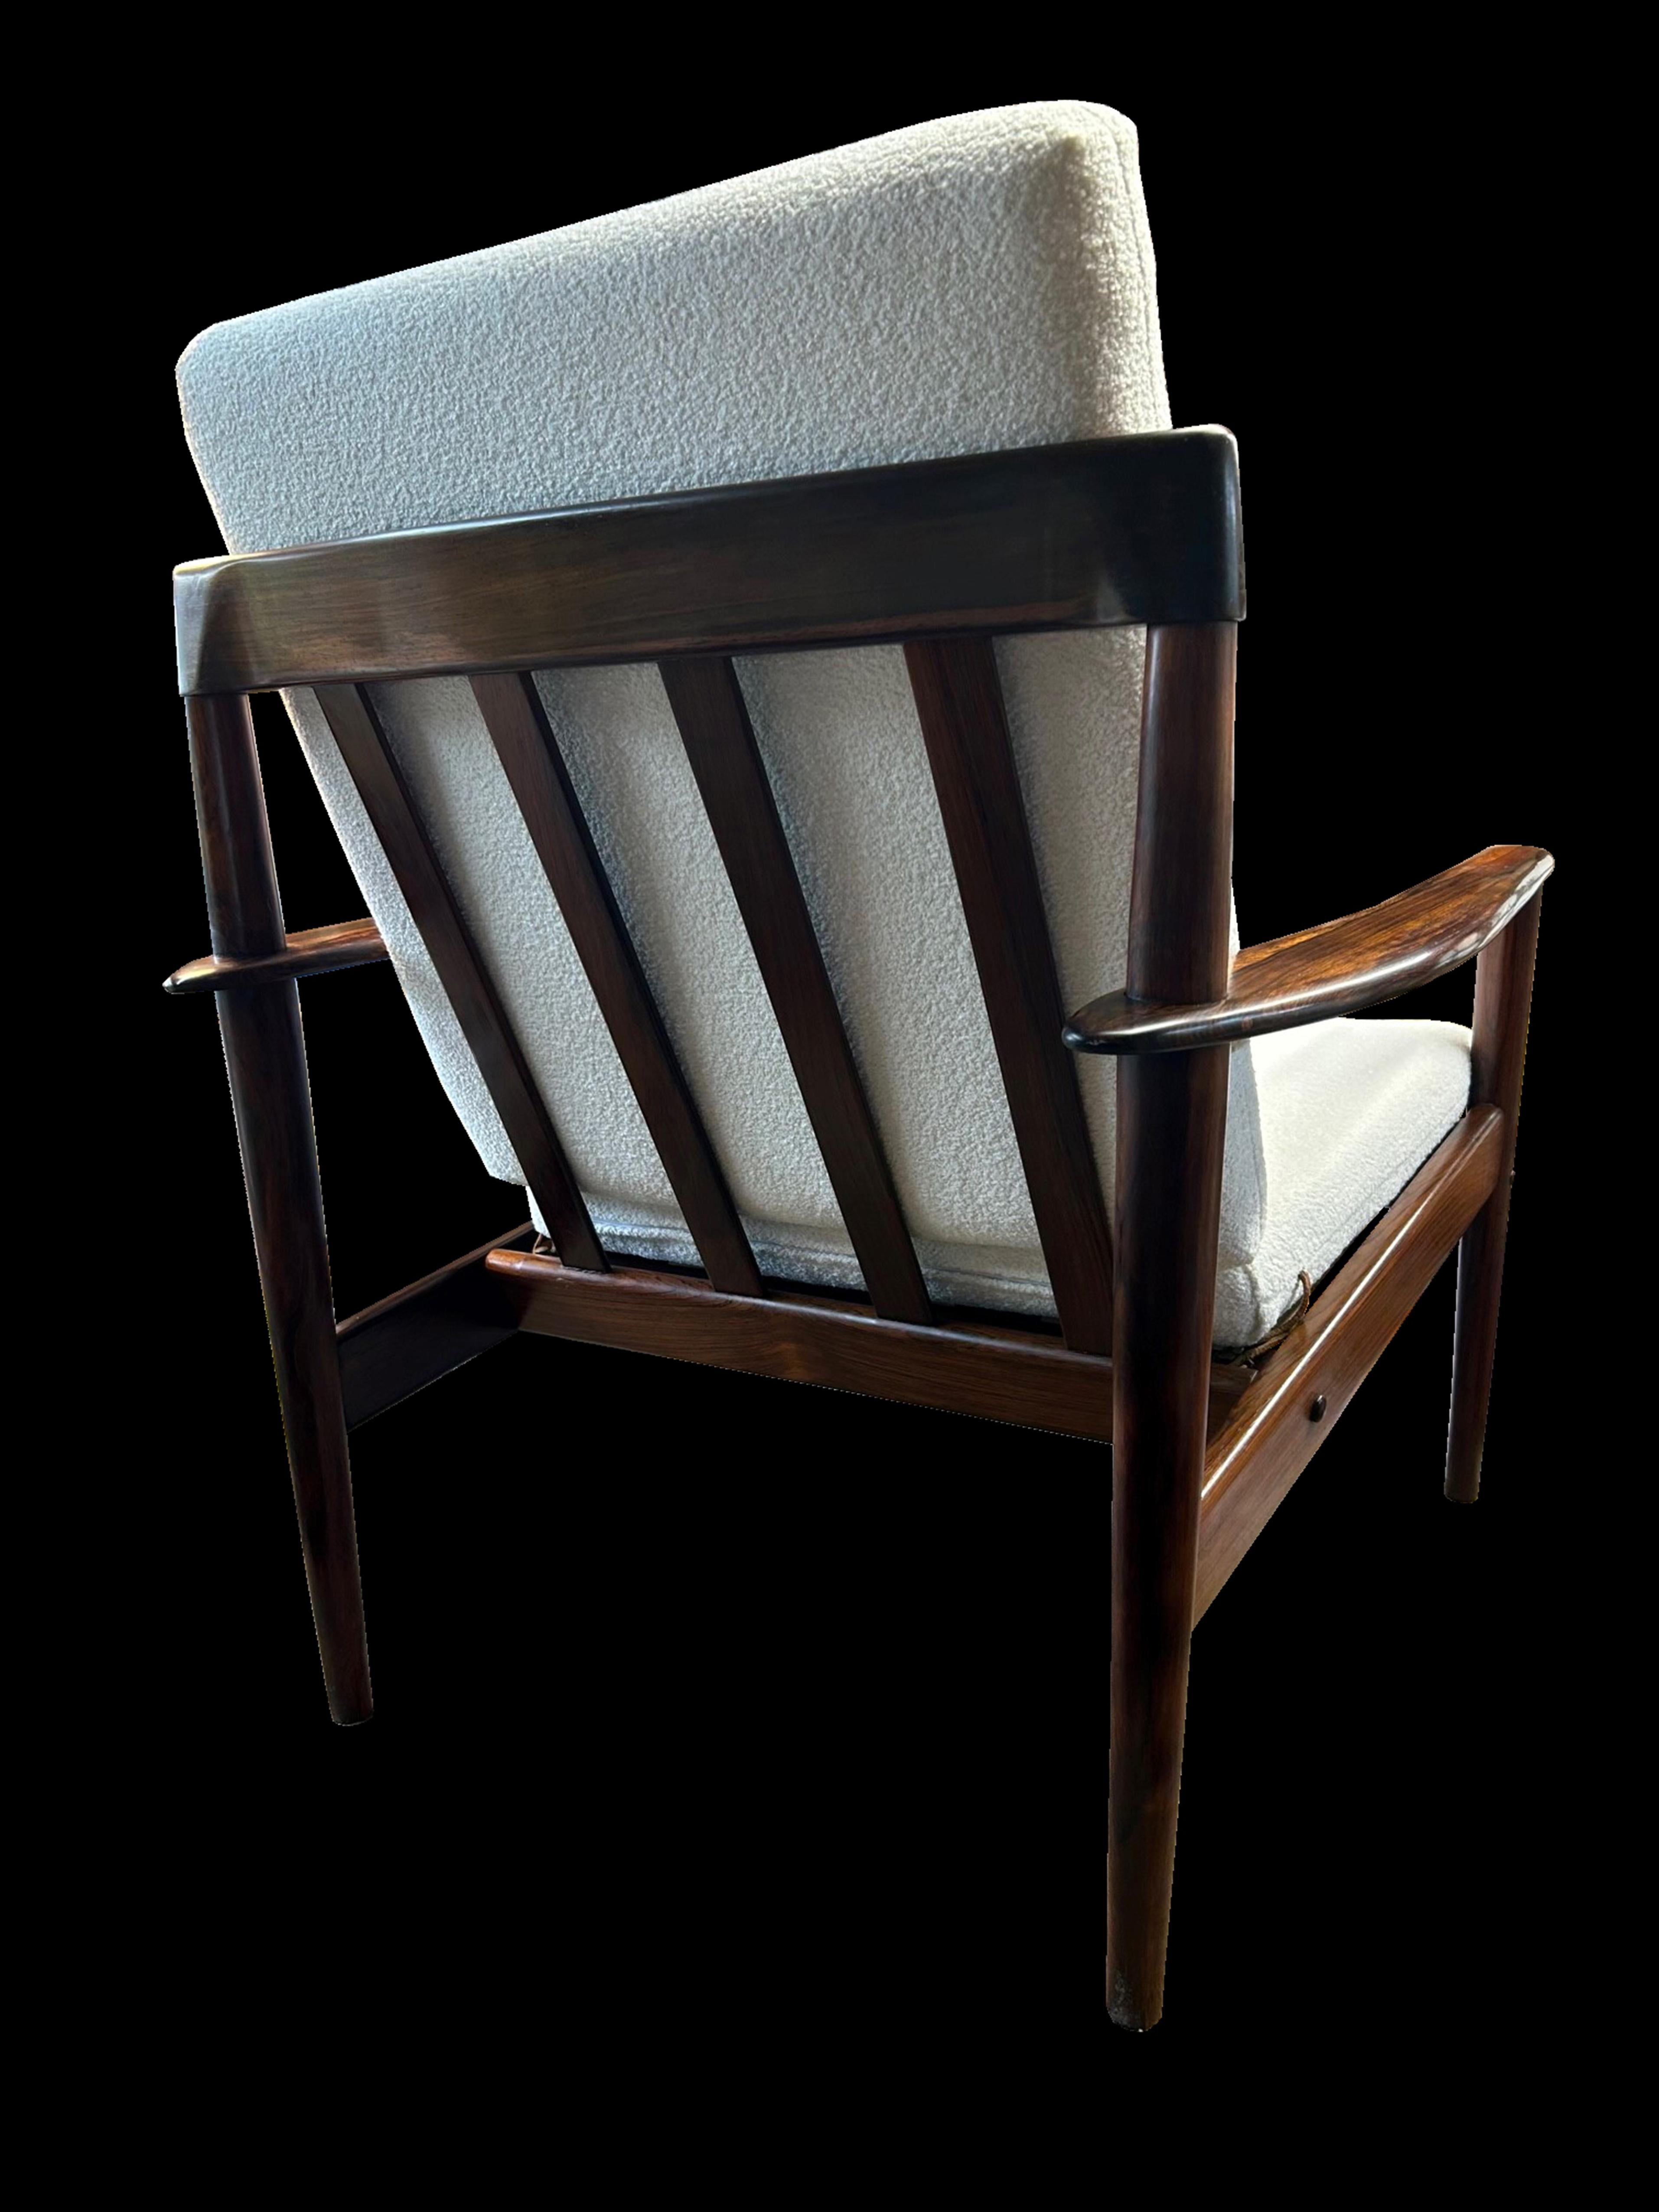 20th Century Danish Santos Rosewood Model 56 Armchair by Grete Jalk for Poul Jeppesen For Sale